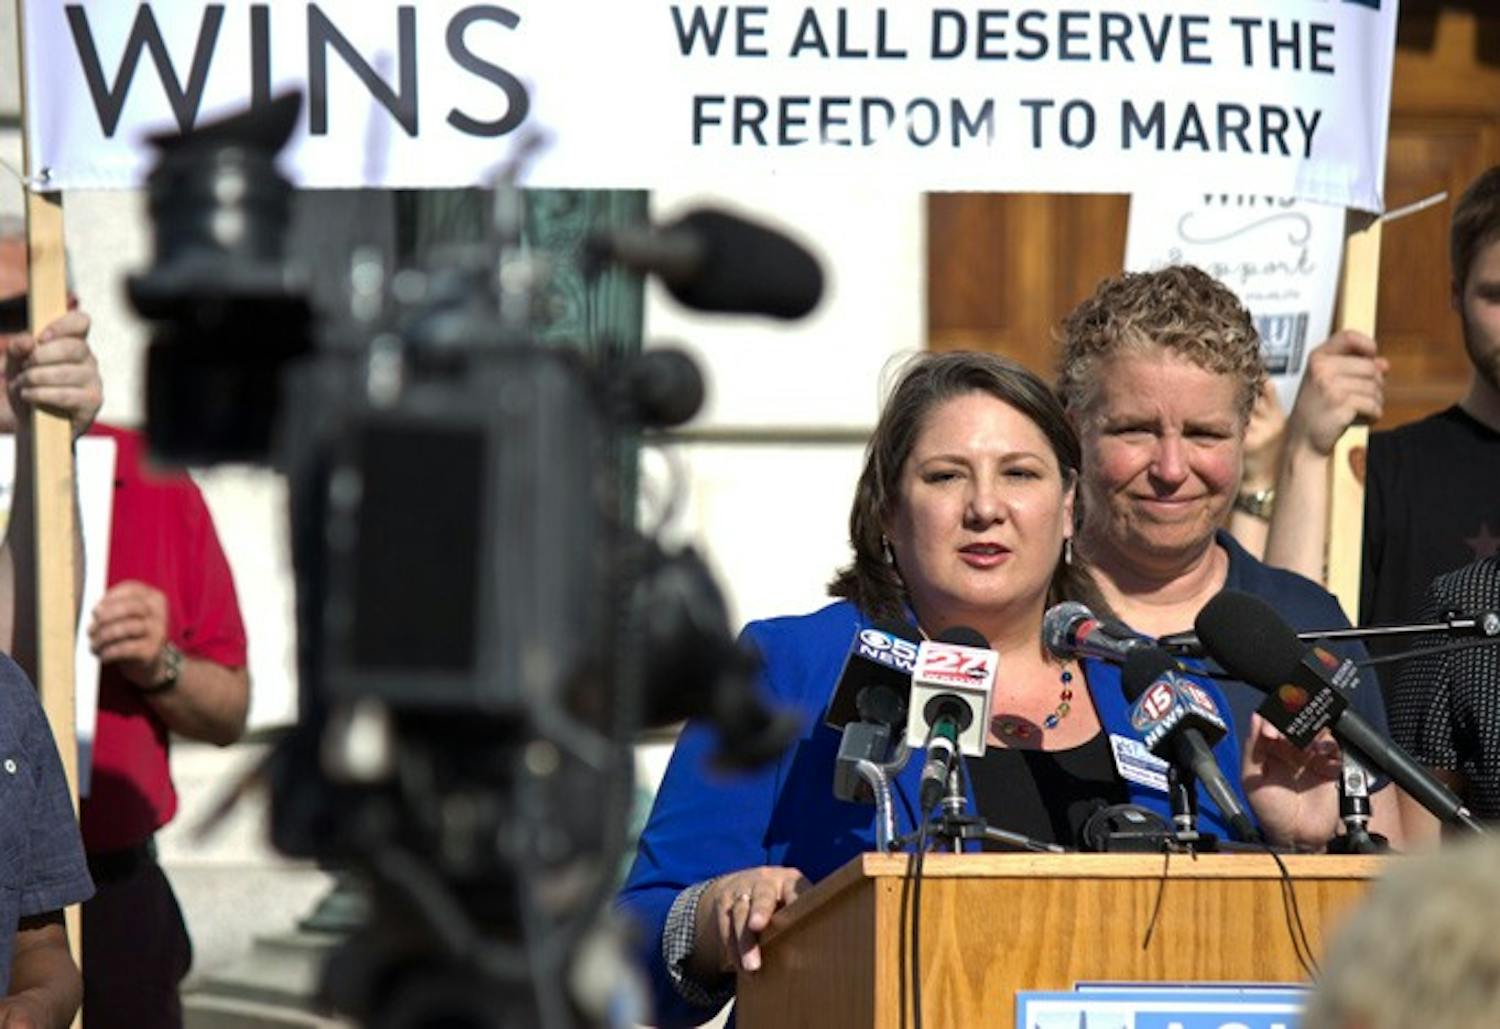 Federal Judge Rules Wisconsin Same-Sex Marriage Ban Unconstitutional